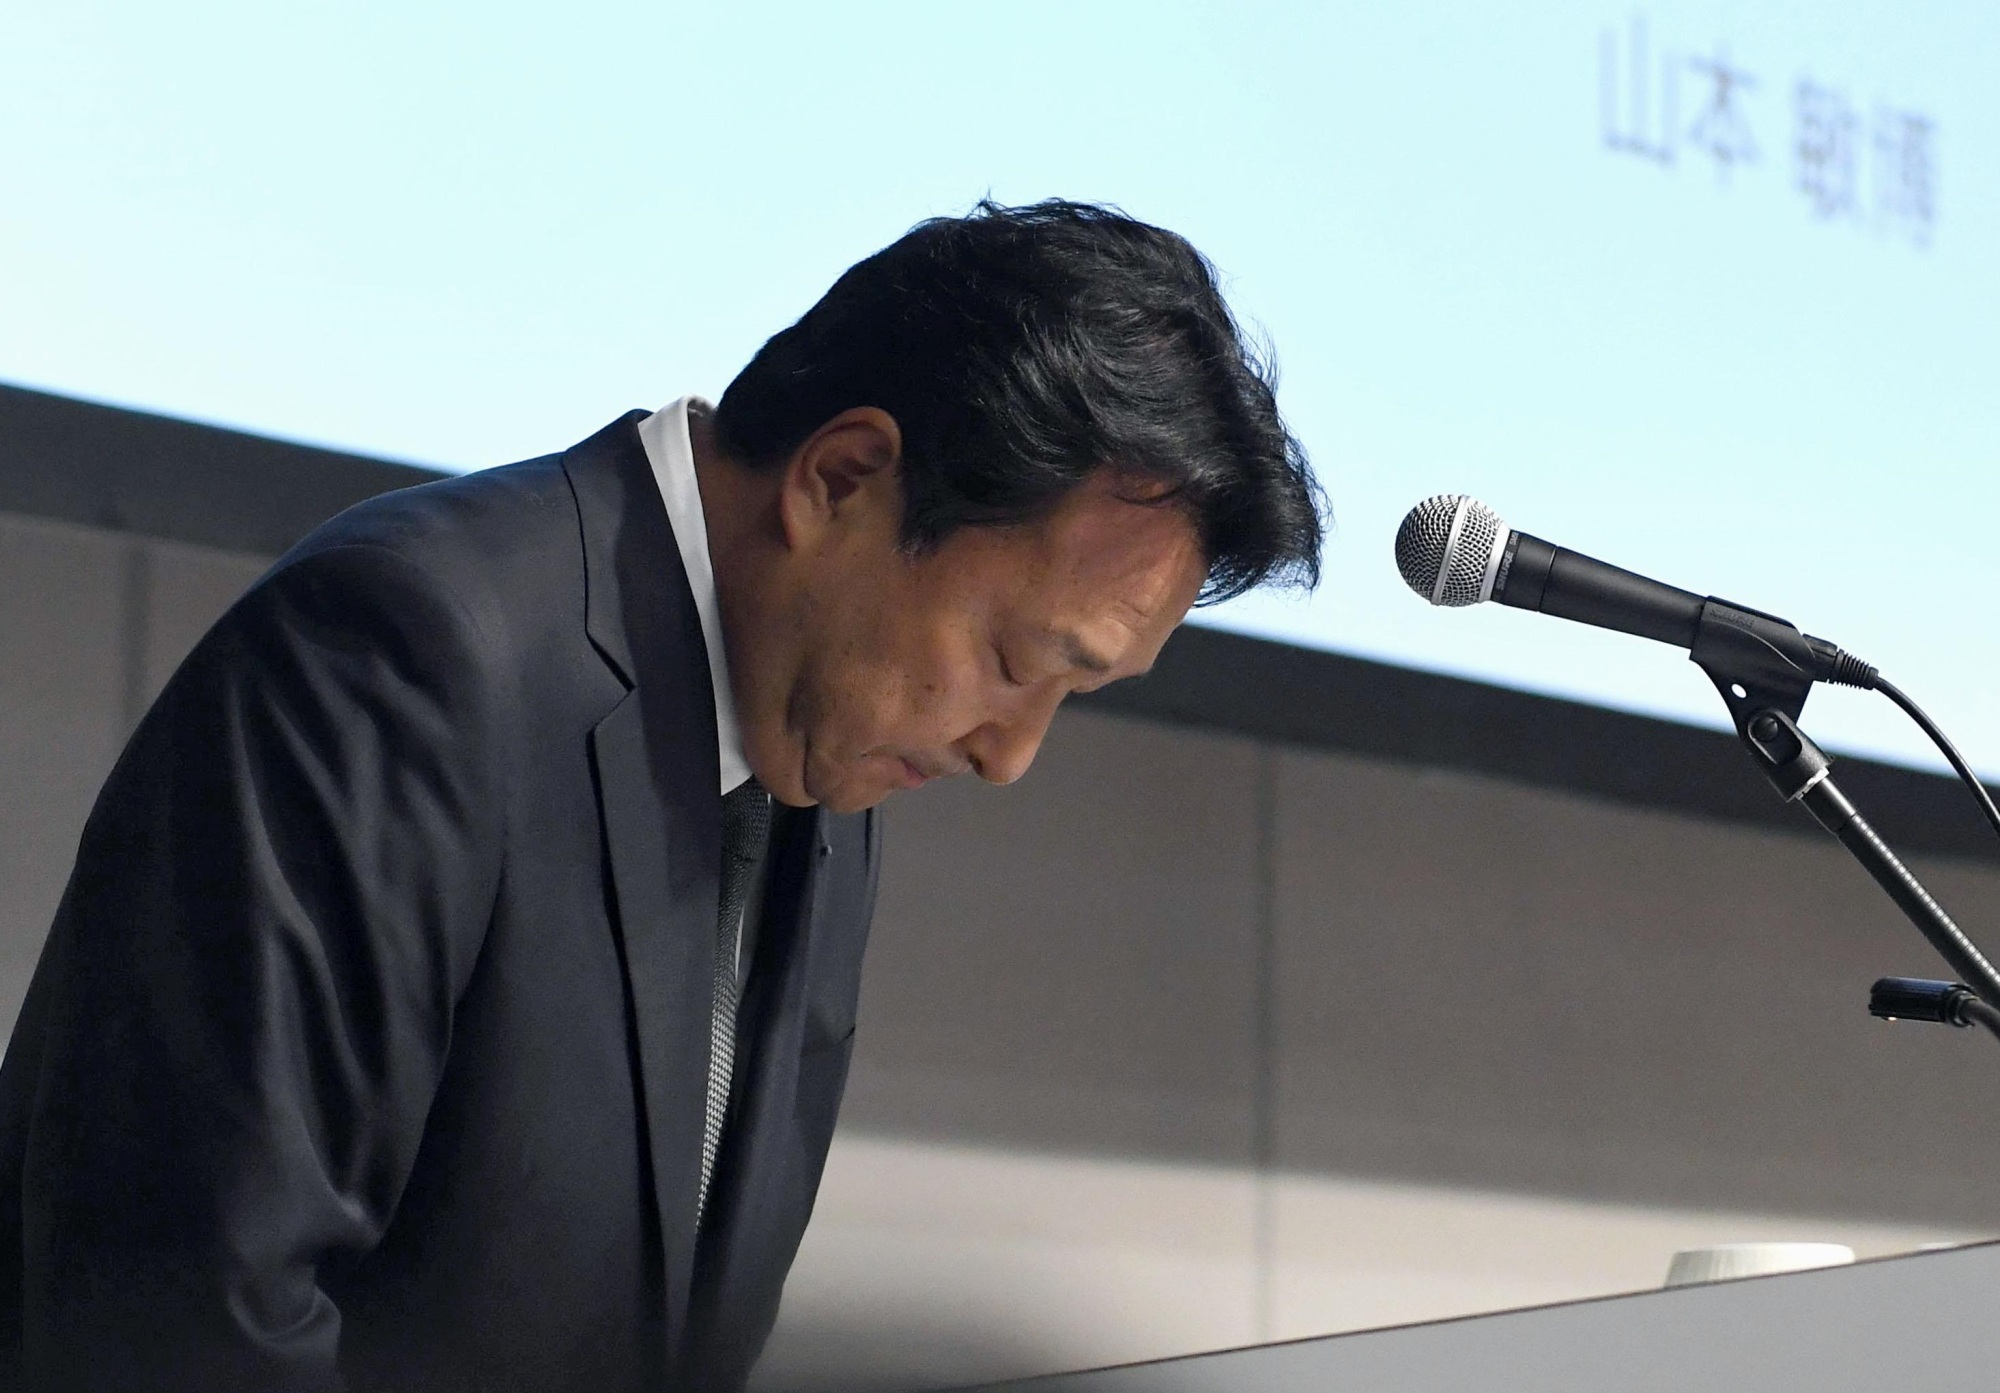 Dentsu President Toshihiro Yamamoto apologizes at a news conference in Tokyo on Thursday. | KYODO